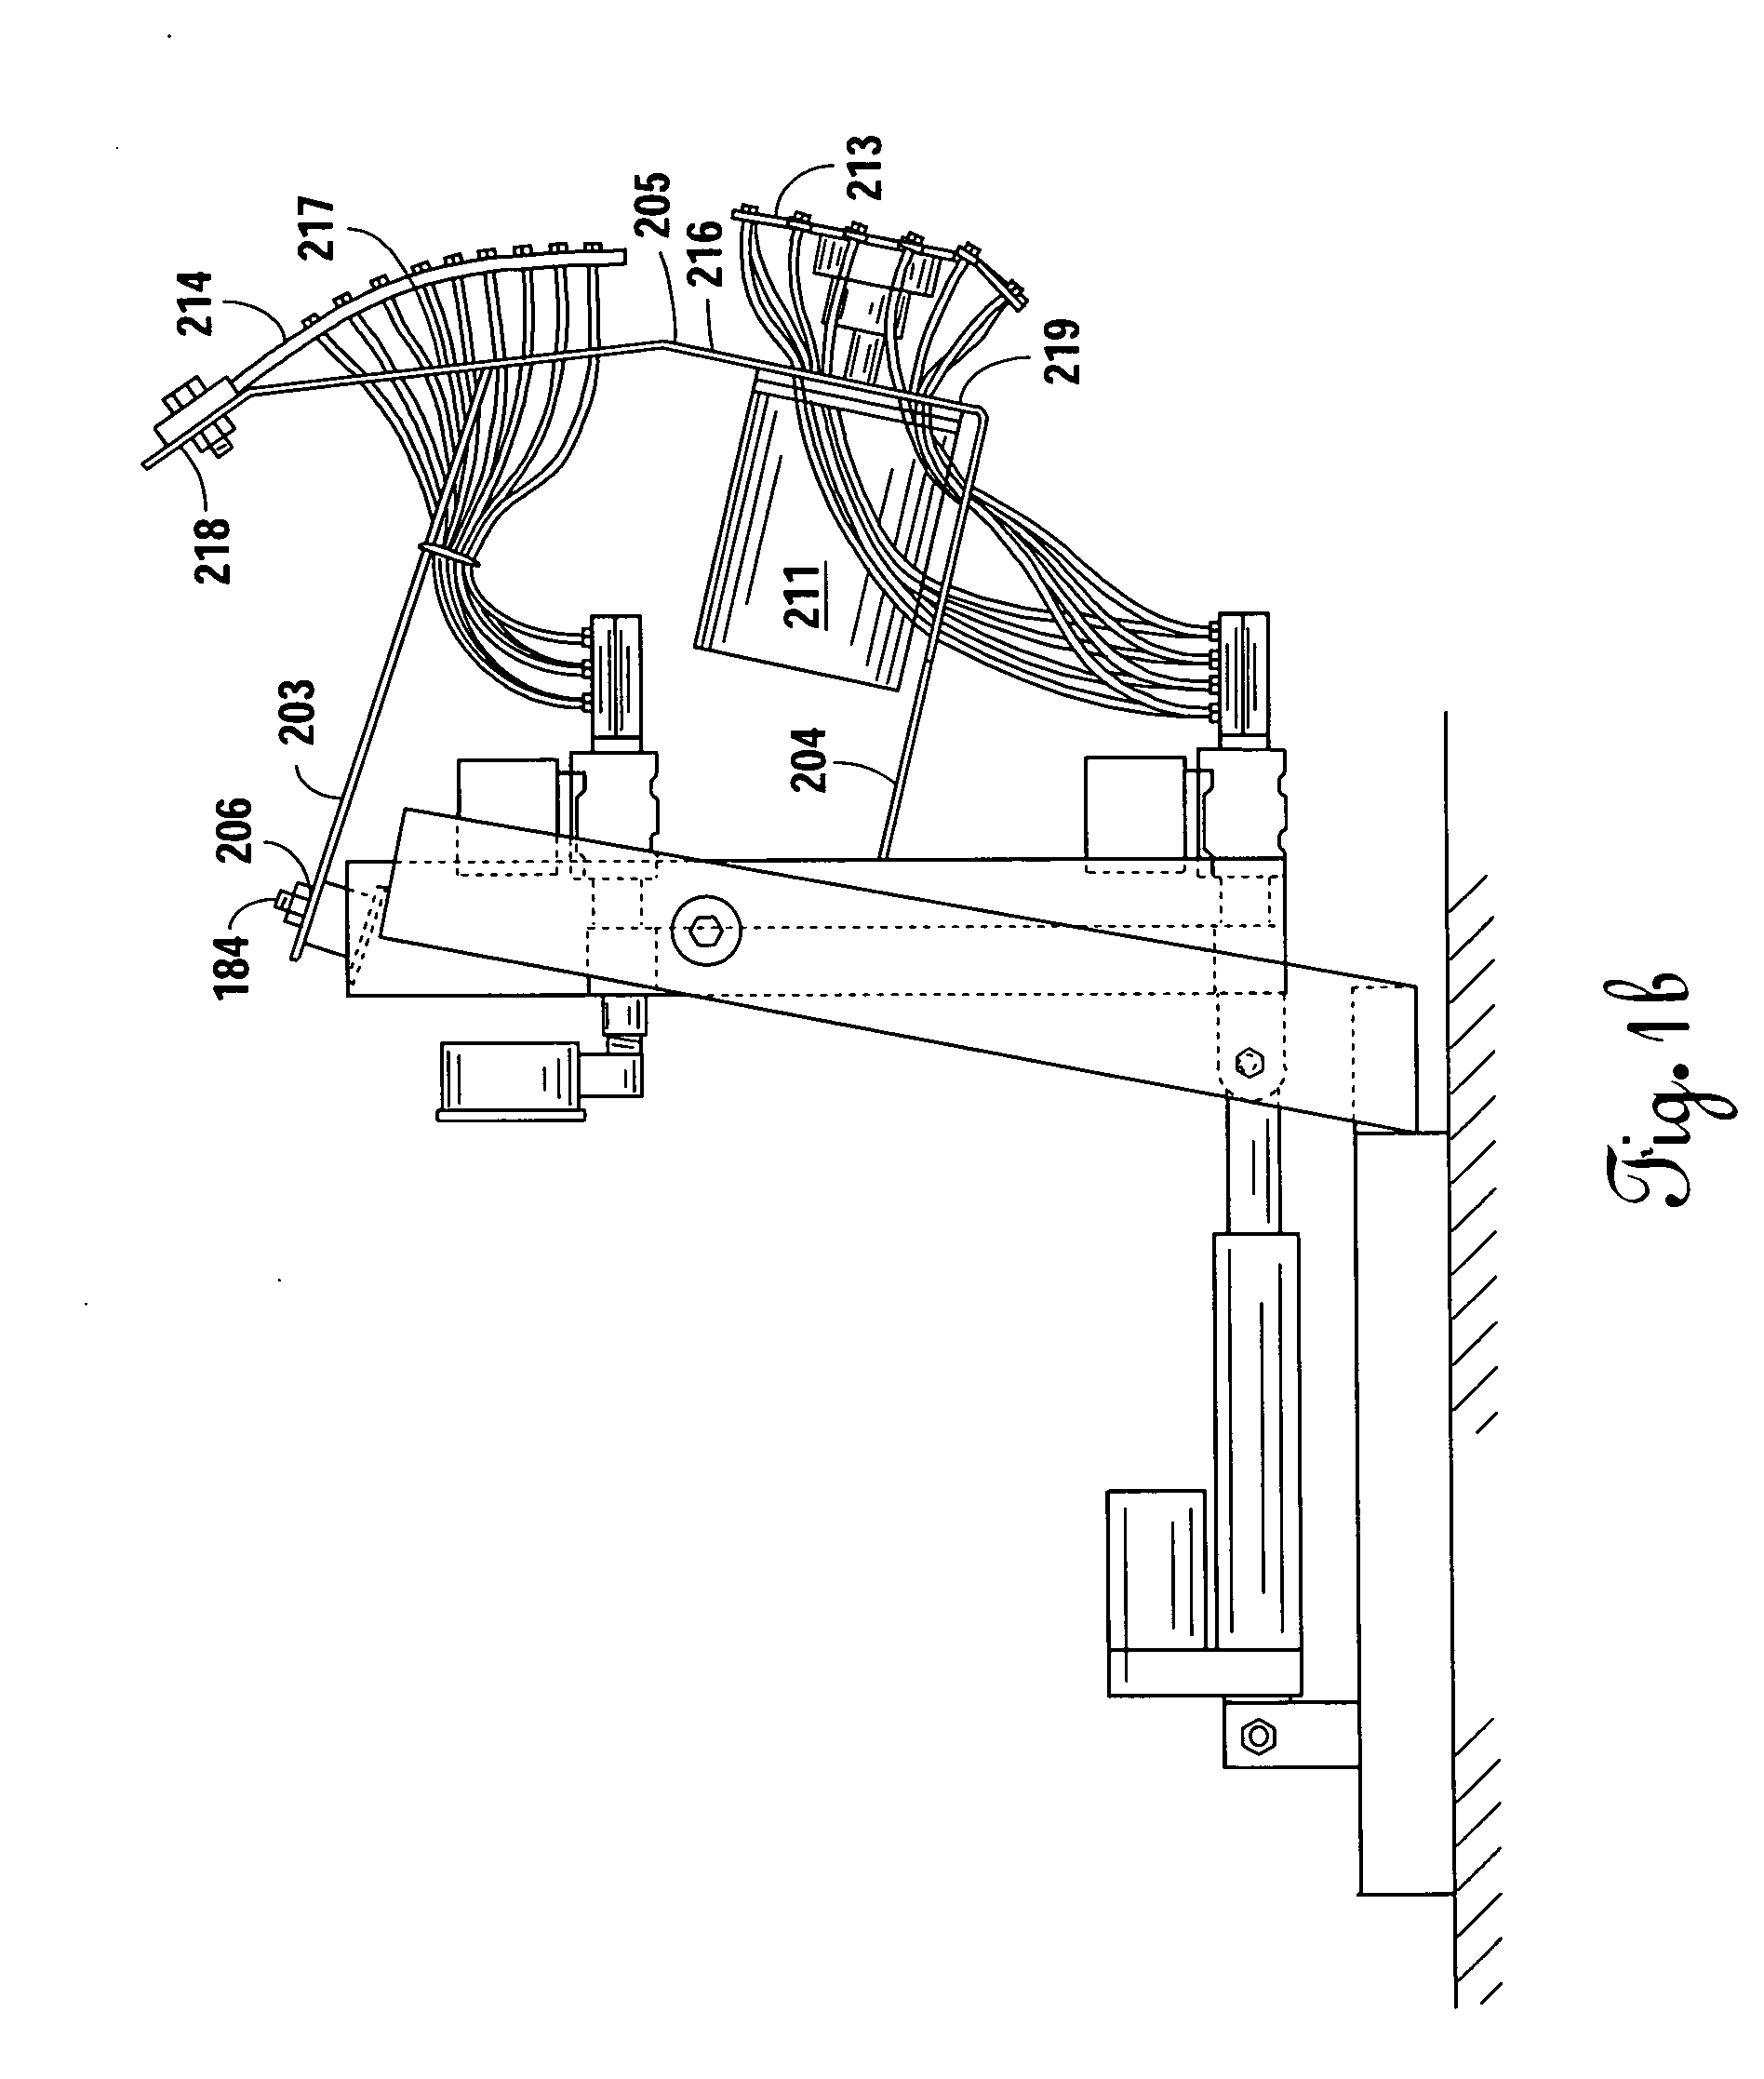 Method and apparatus for a spray system